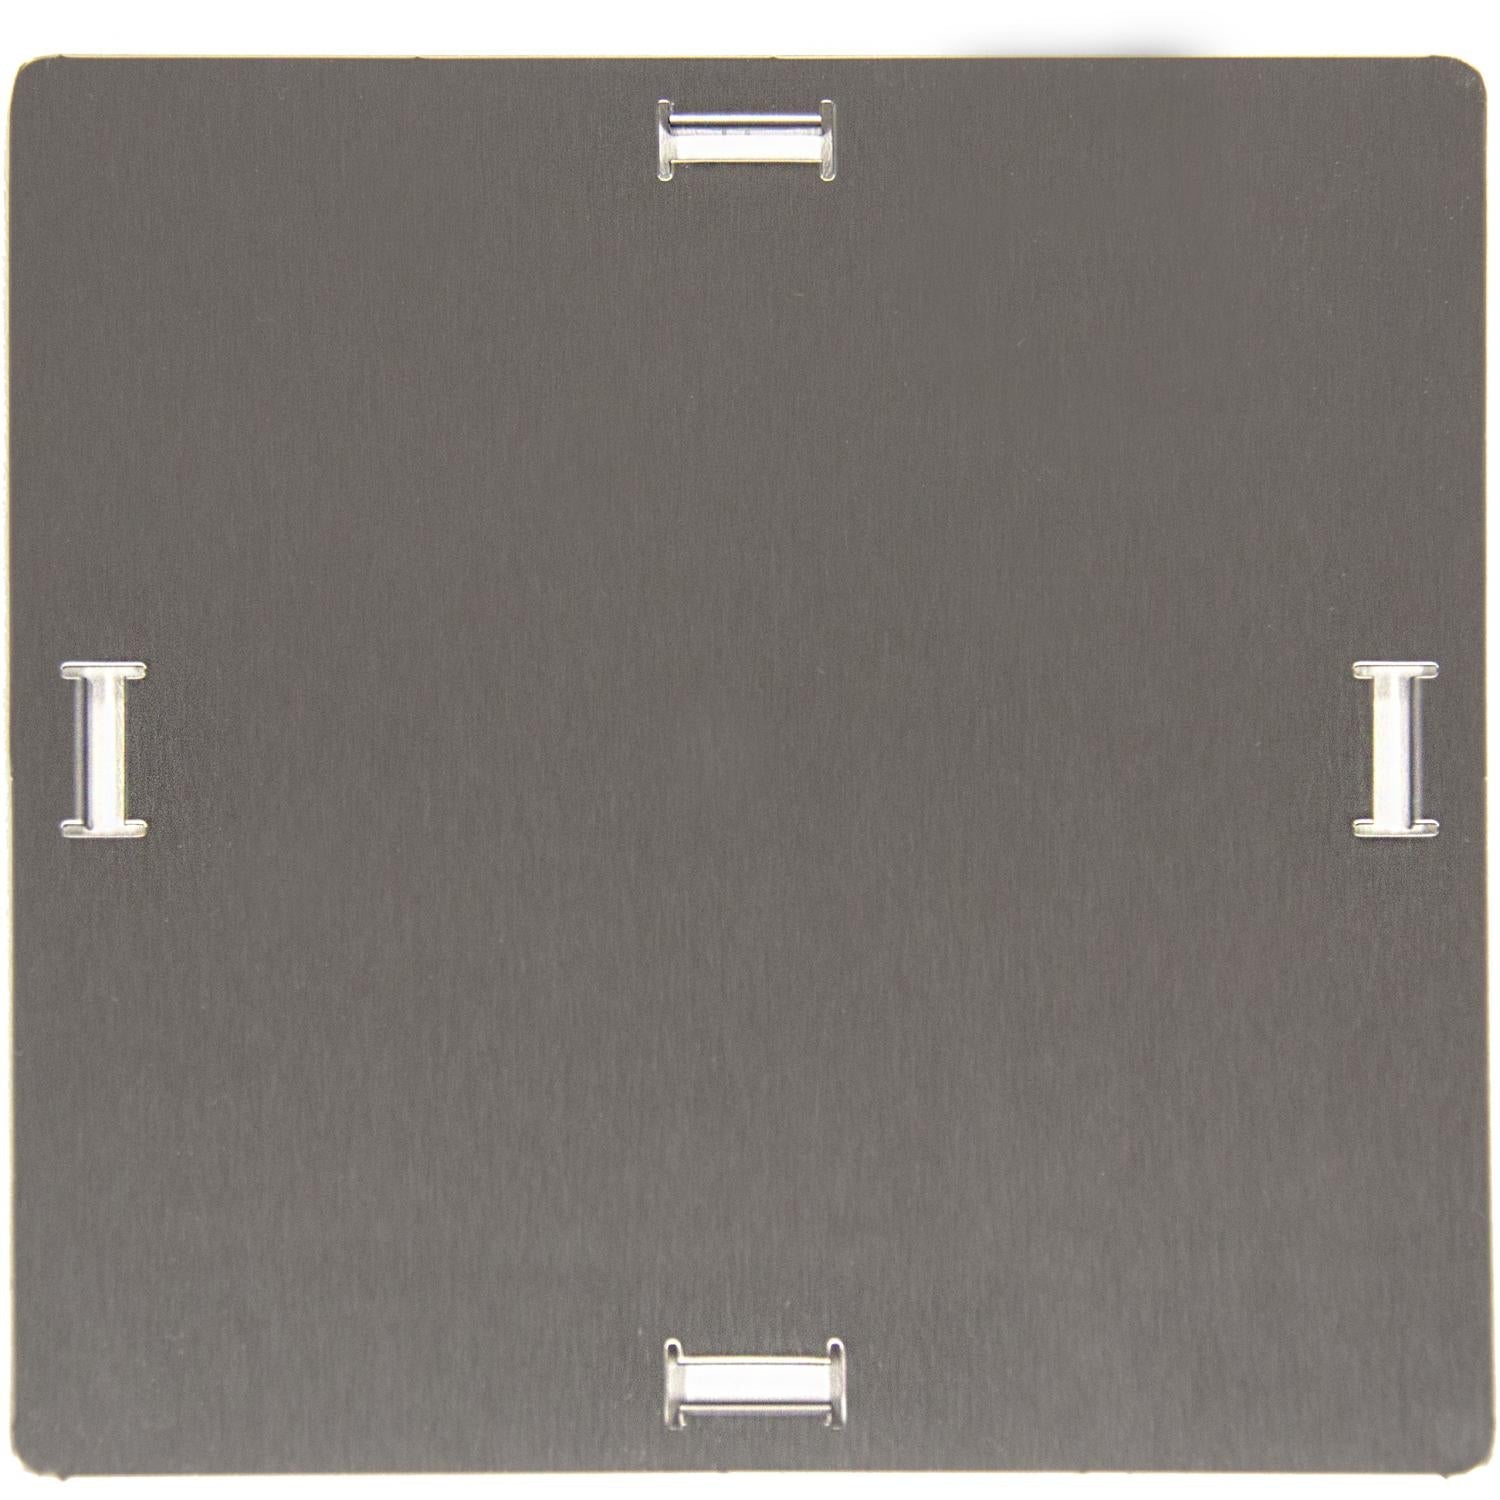 Blaze Stainless Steel Propane Tank Hole Cover For Grill 